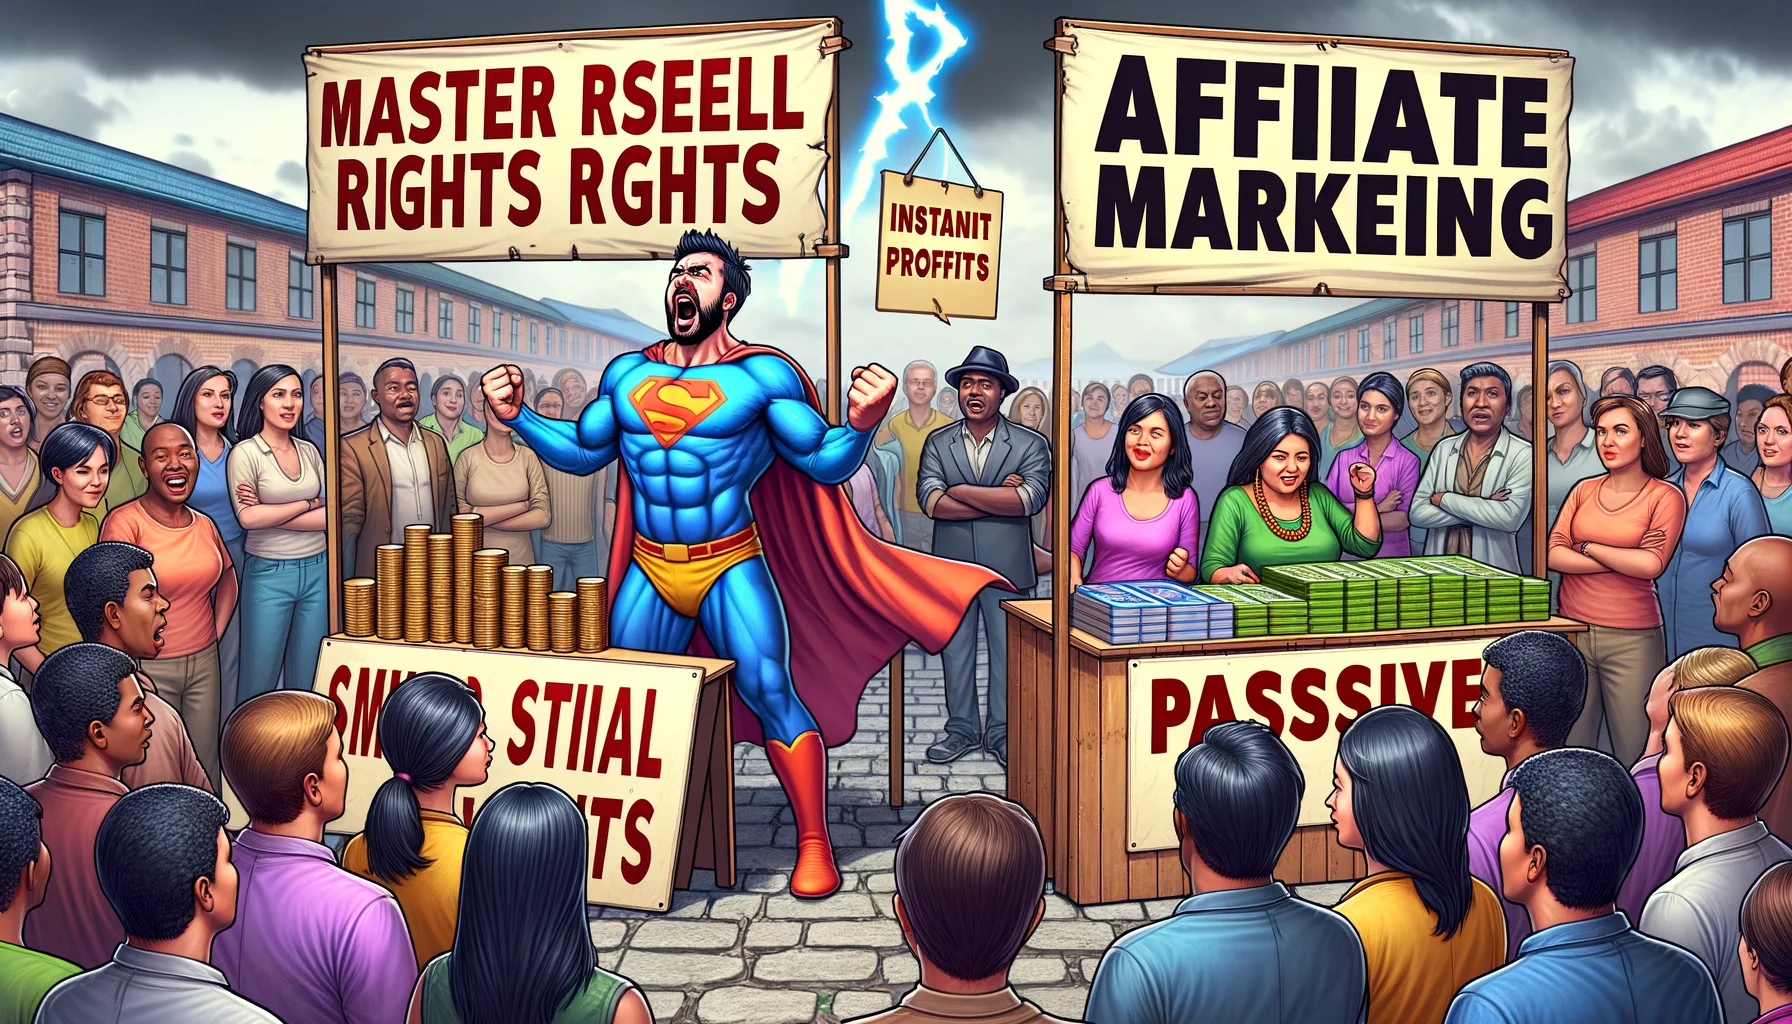 Create a humorous image depicting the competition between Master Resell Rights and Affiliate Marketing. Perhaps there's a market scene with two stalls side by side. On one side, a Caucasian man energetically shouting out the benefits of his digitally represented 'Master Resell Rights' products, wearing a cape like a superhero and holding a sign that says 'Instant Profits'. On the other side, a South Asian woman with her 'Affiliate Marketing' products, sitting cool and calm with a knowing smile, holding a sign that says 'Passive Income', with a queue of diverse customers showing interest. Make sure the image looks funny yet realistic.